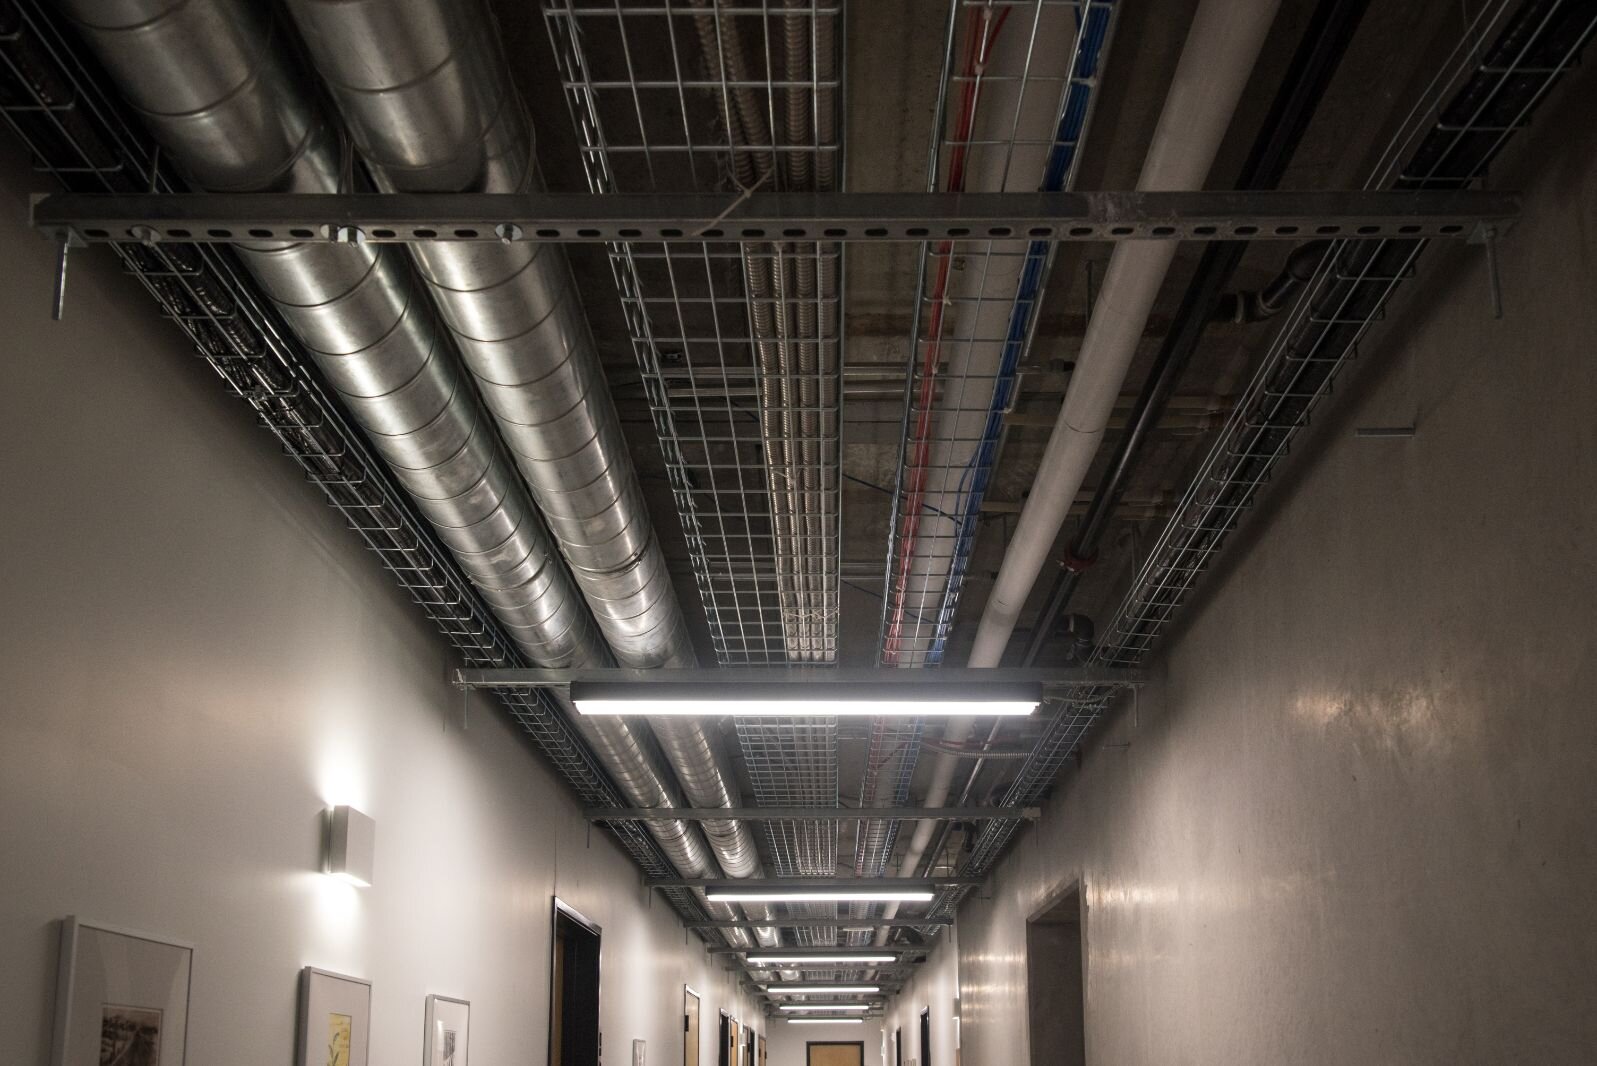 Precast concrete floors and walls, along with exposed overhead utility pipes, are part of the “industrial modern” interior design of Harrison Circle Apartments.